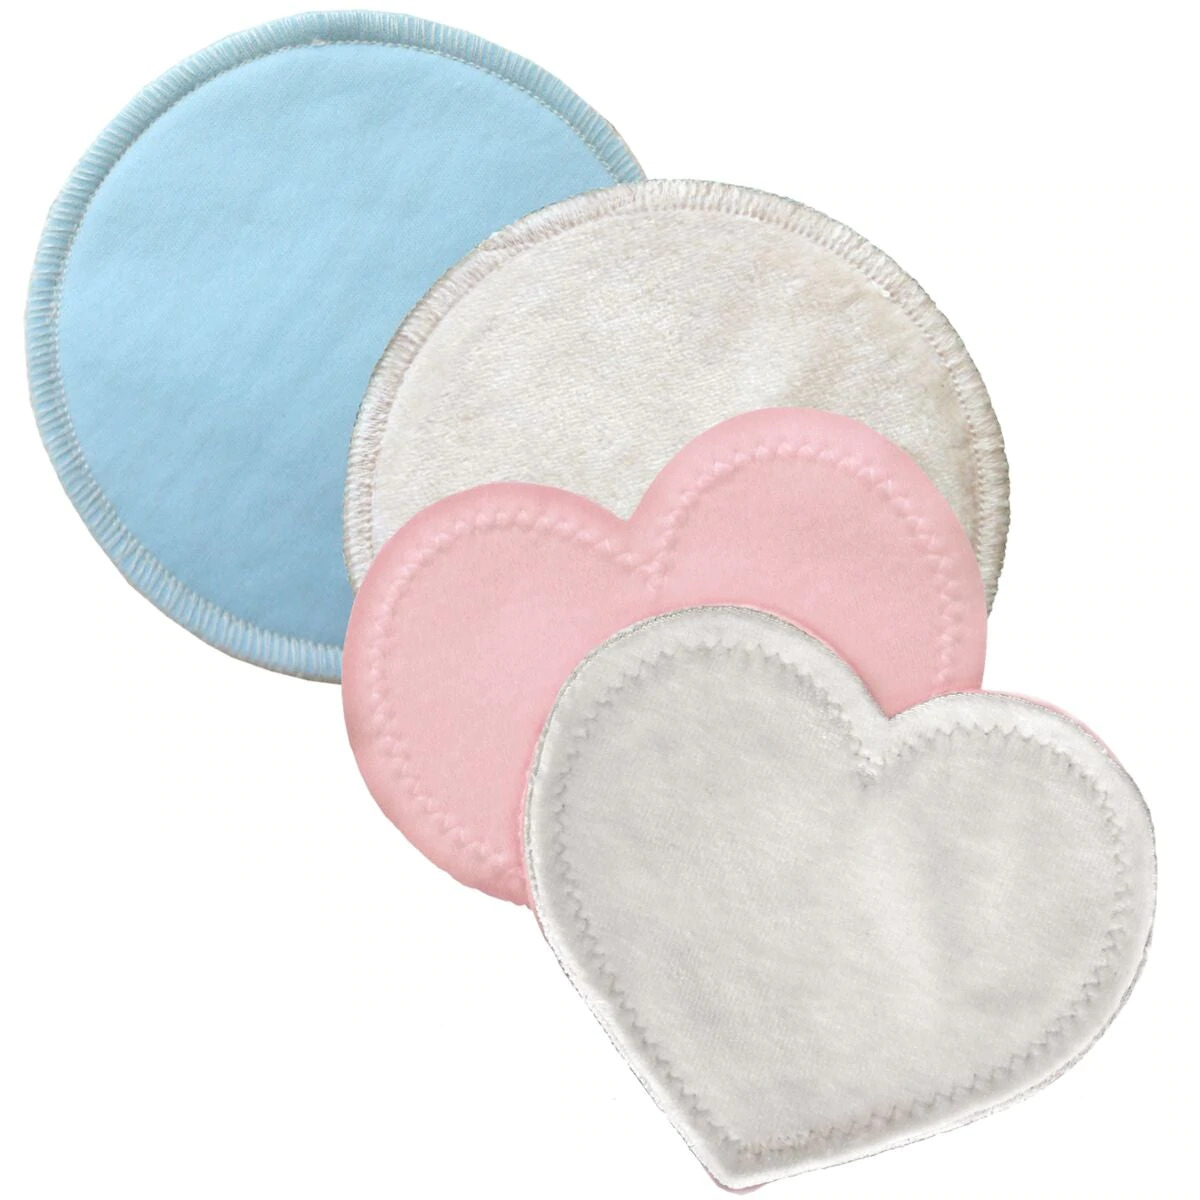 8Pairs Soft Bamboo Nursing Pad Washable Reusable Nursing Breast Pad Breastfeeding Pads Absorbent Waterproof Stay Dry Cloth Pad, Size: 8 Pairs, Other